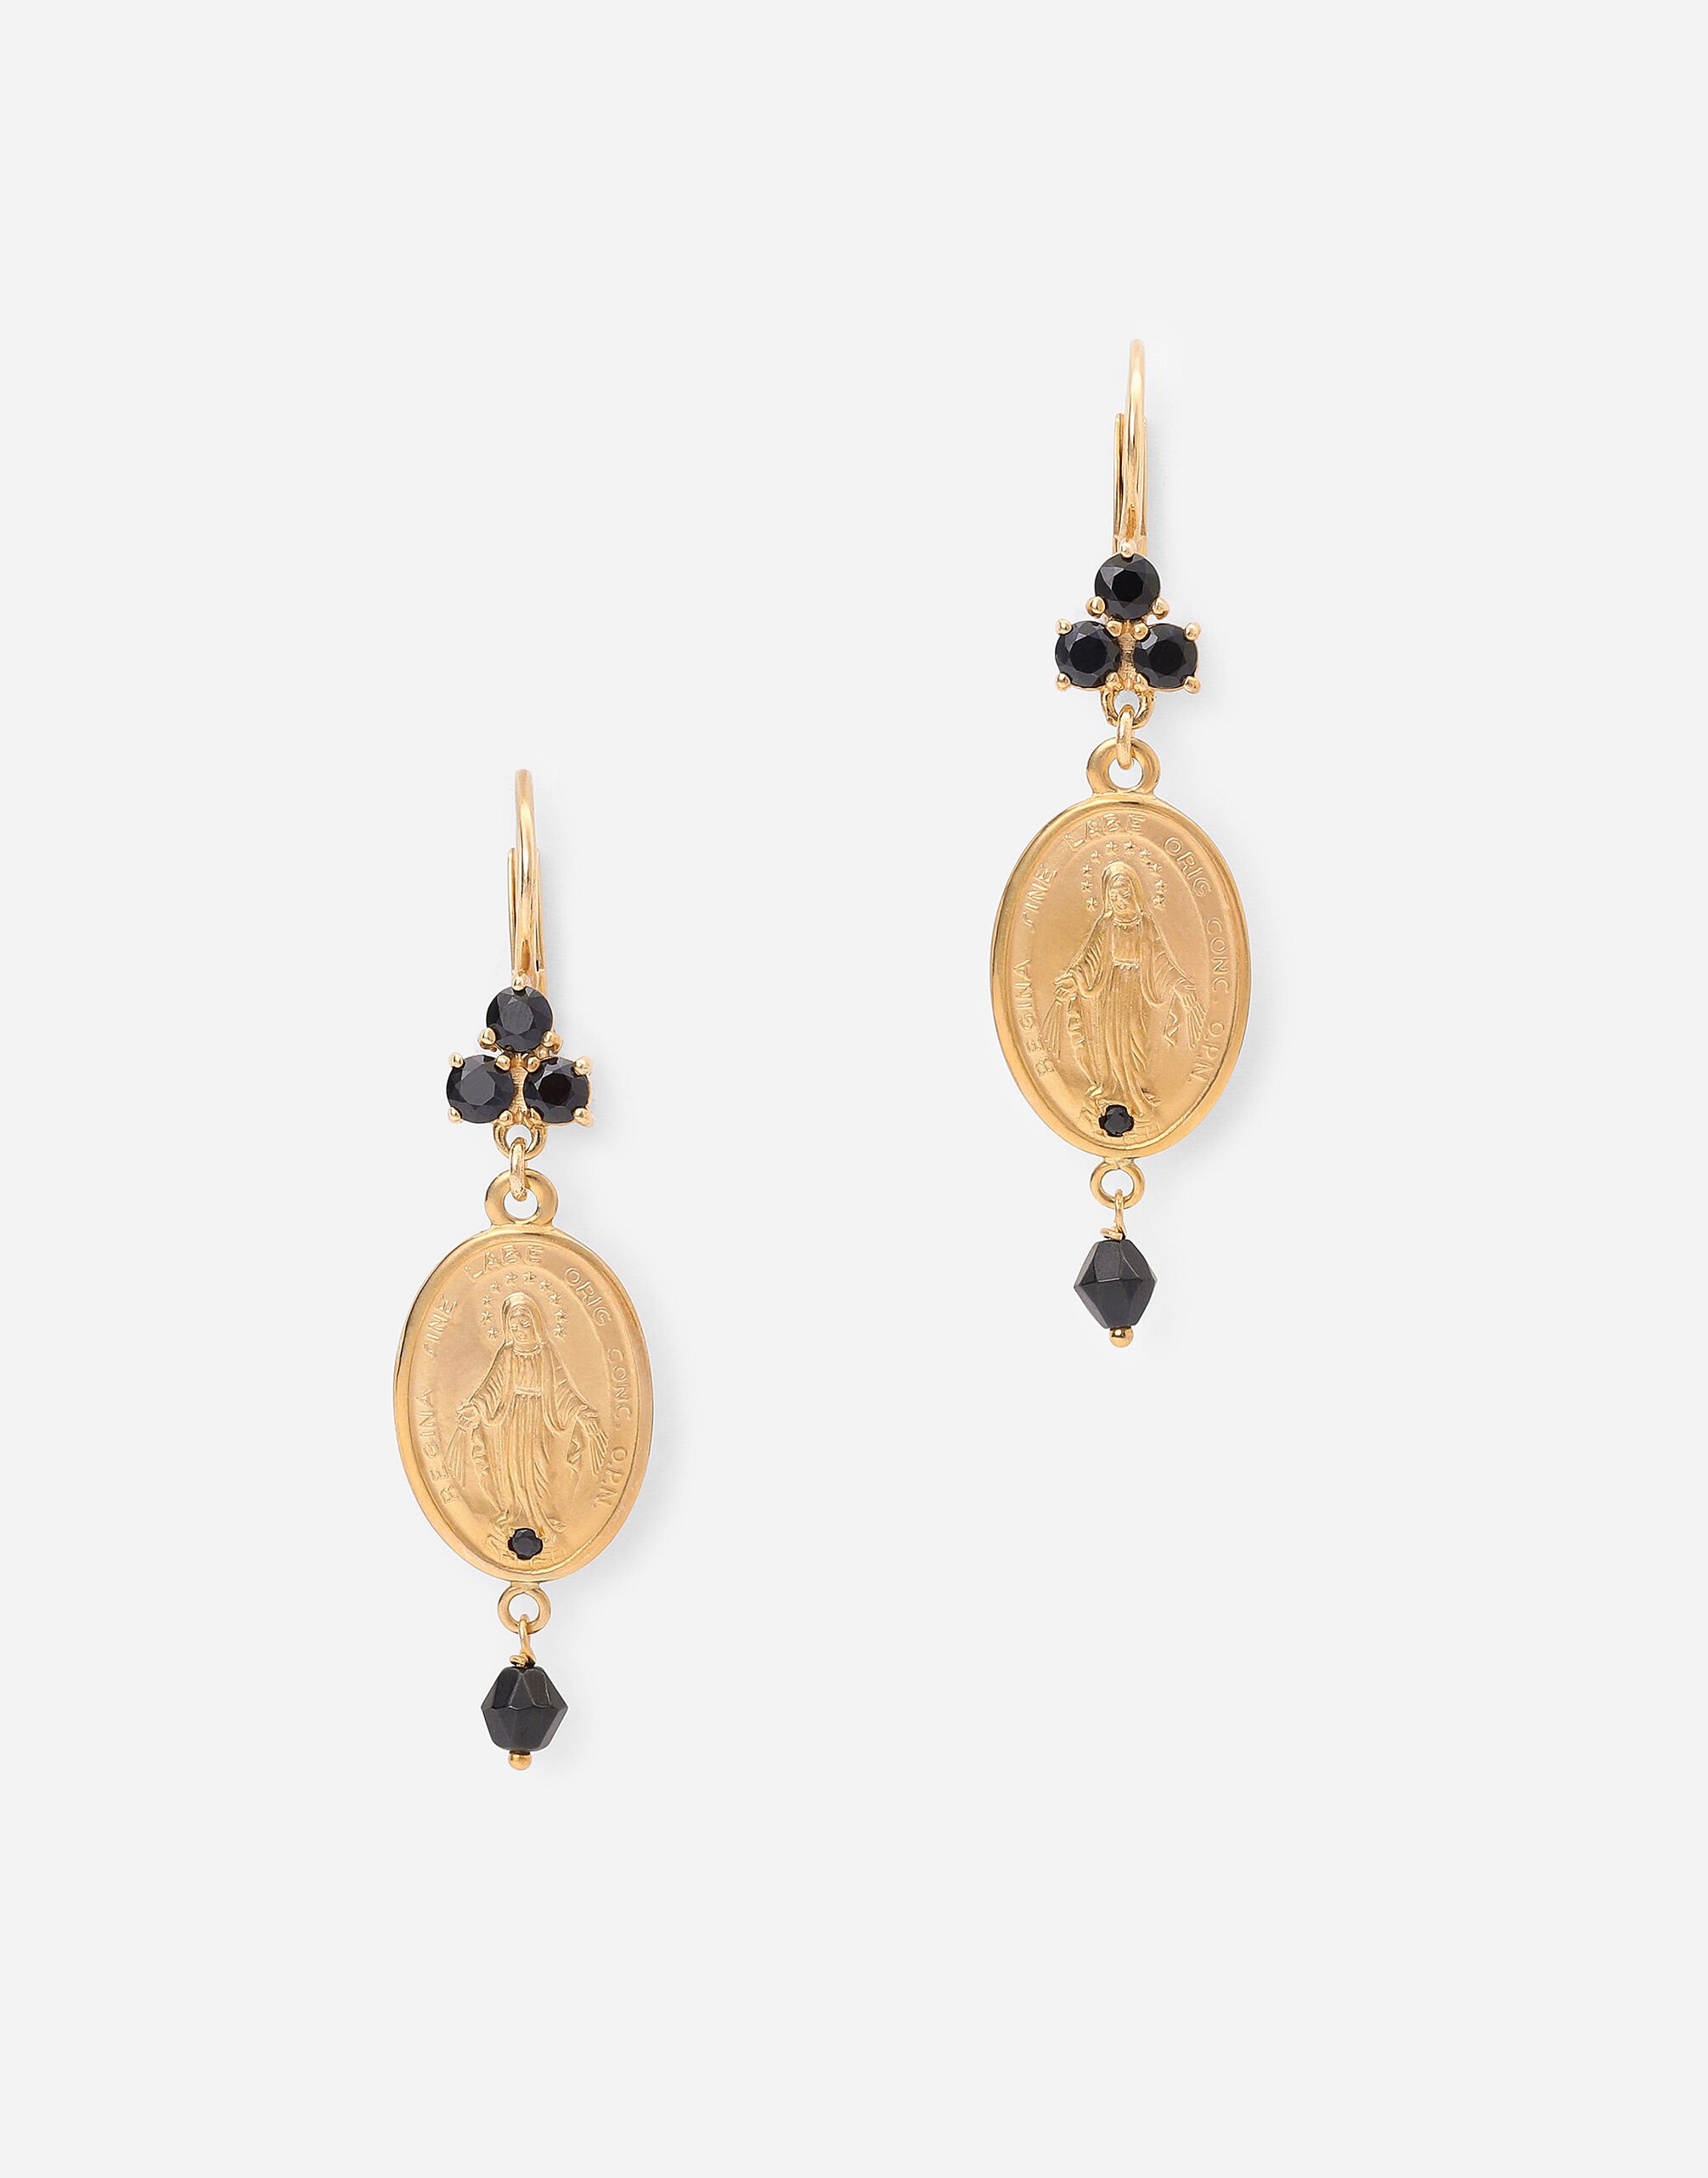 Dolce & Gabbana Tradition earrings in yellow 18kt gold with medals Yellow Gold WAQR2GWMIX1